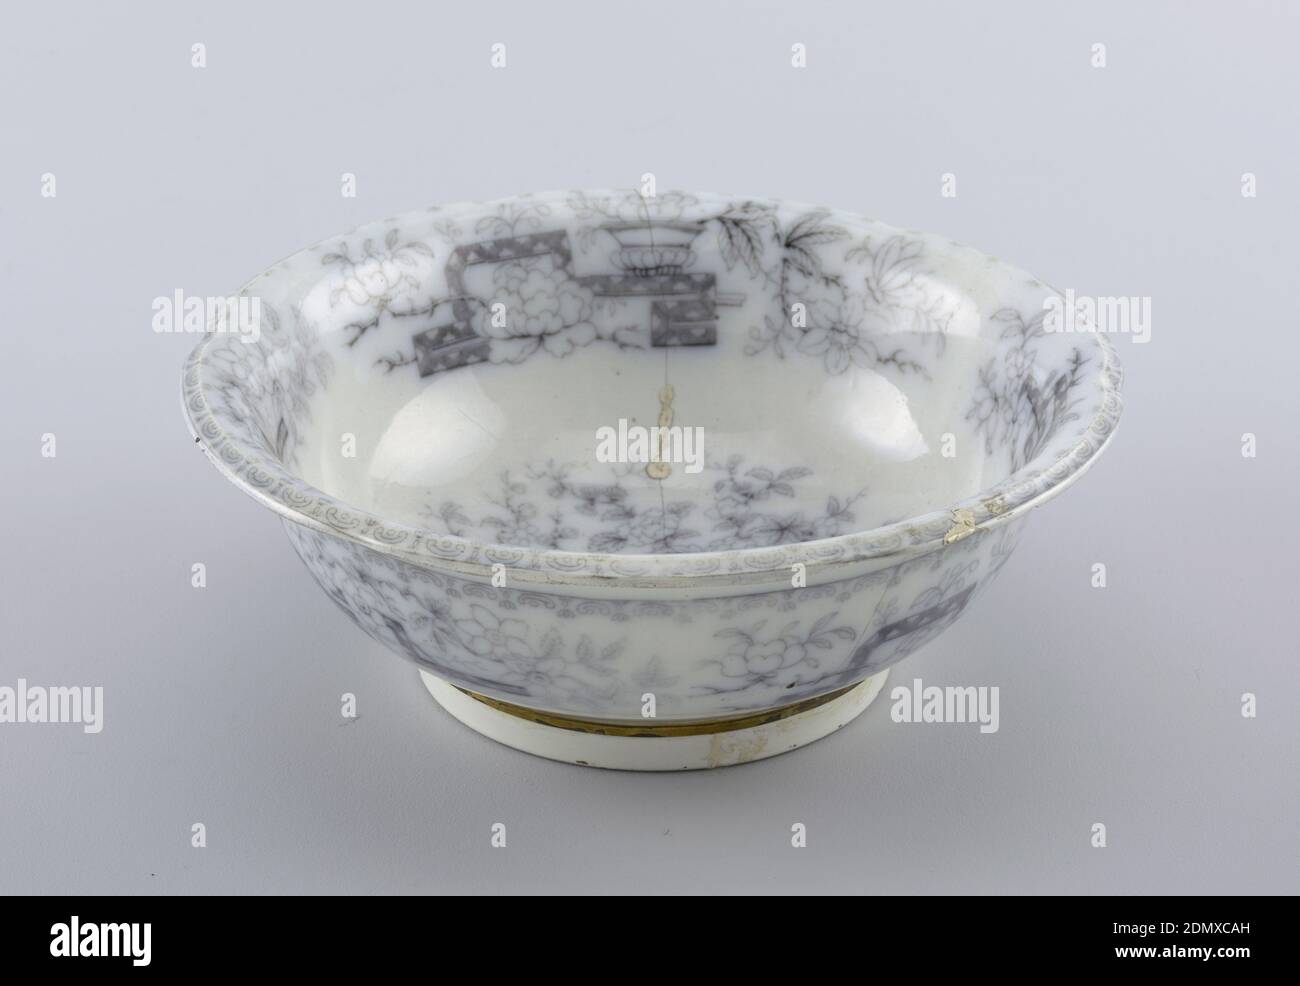 Bowl, Glazed porcelain, gold, Bowl with Chinese-style decoration. Cracks are repaired with gold (kintsugi)., 19th century, ceramics, Decorative Arts, Bowl Stock Photo